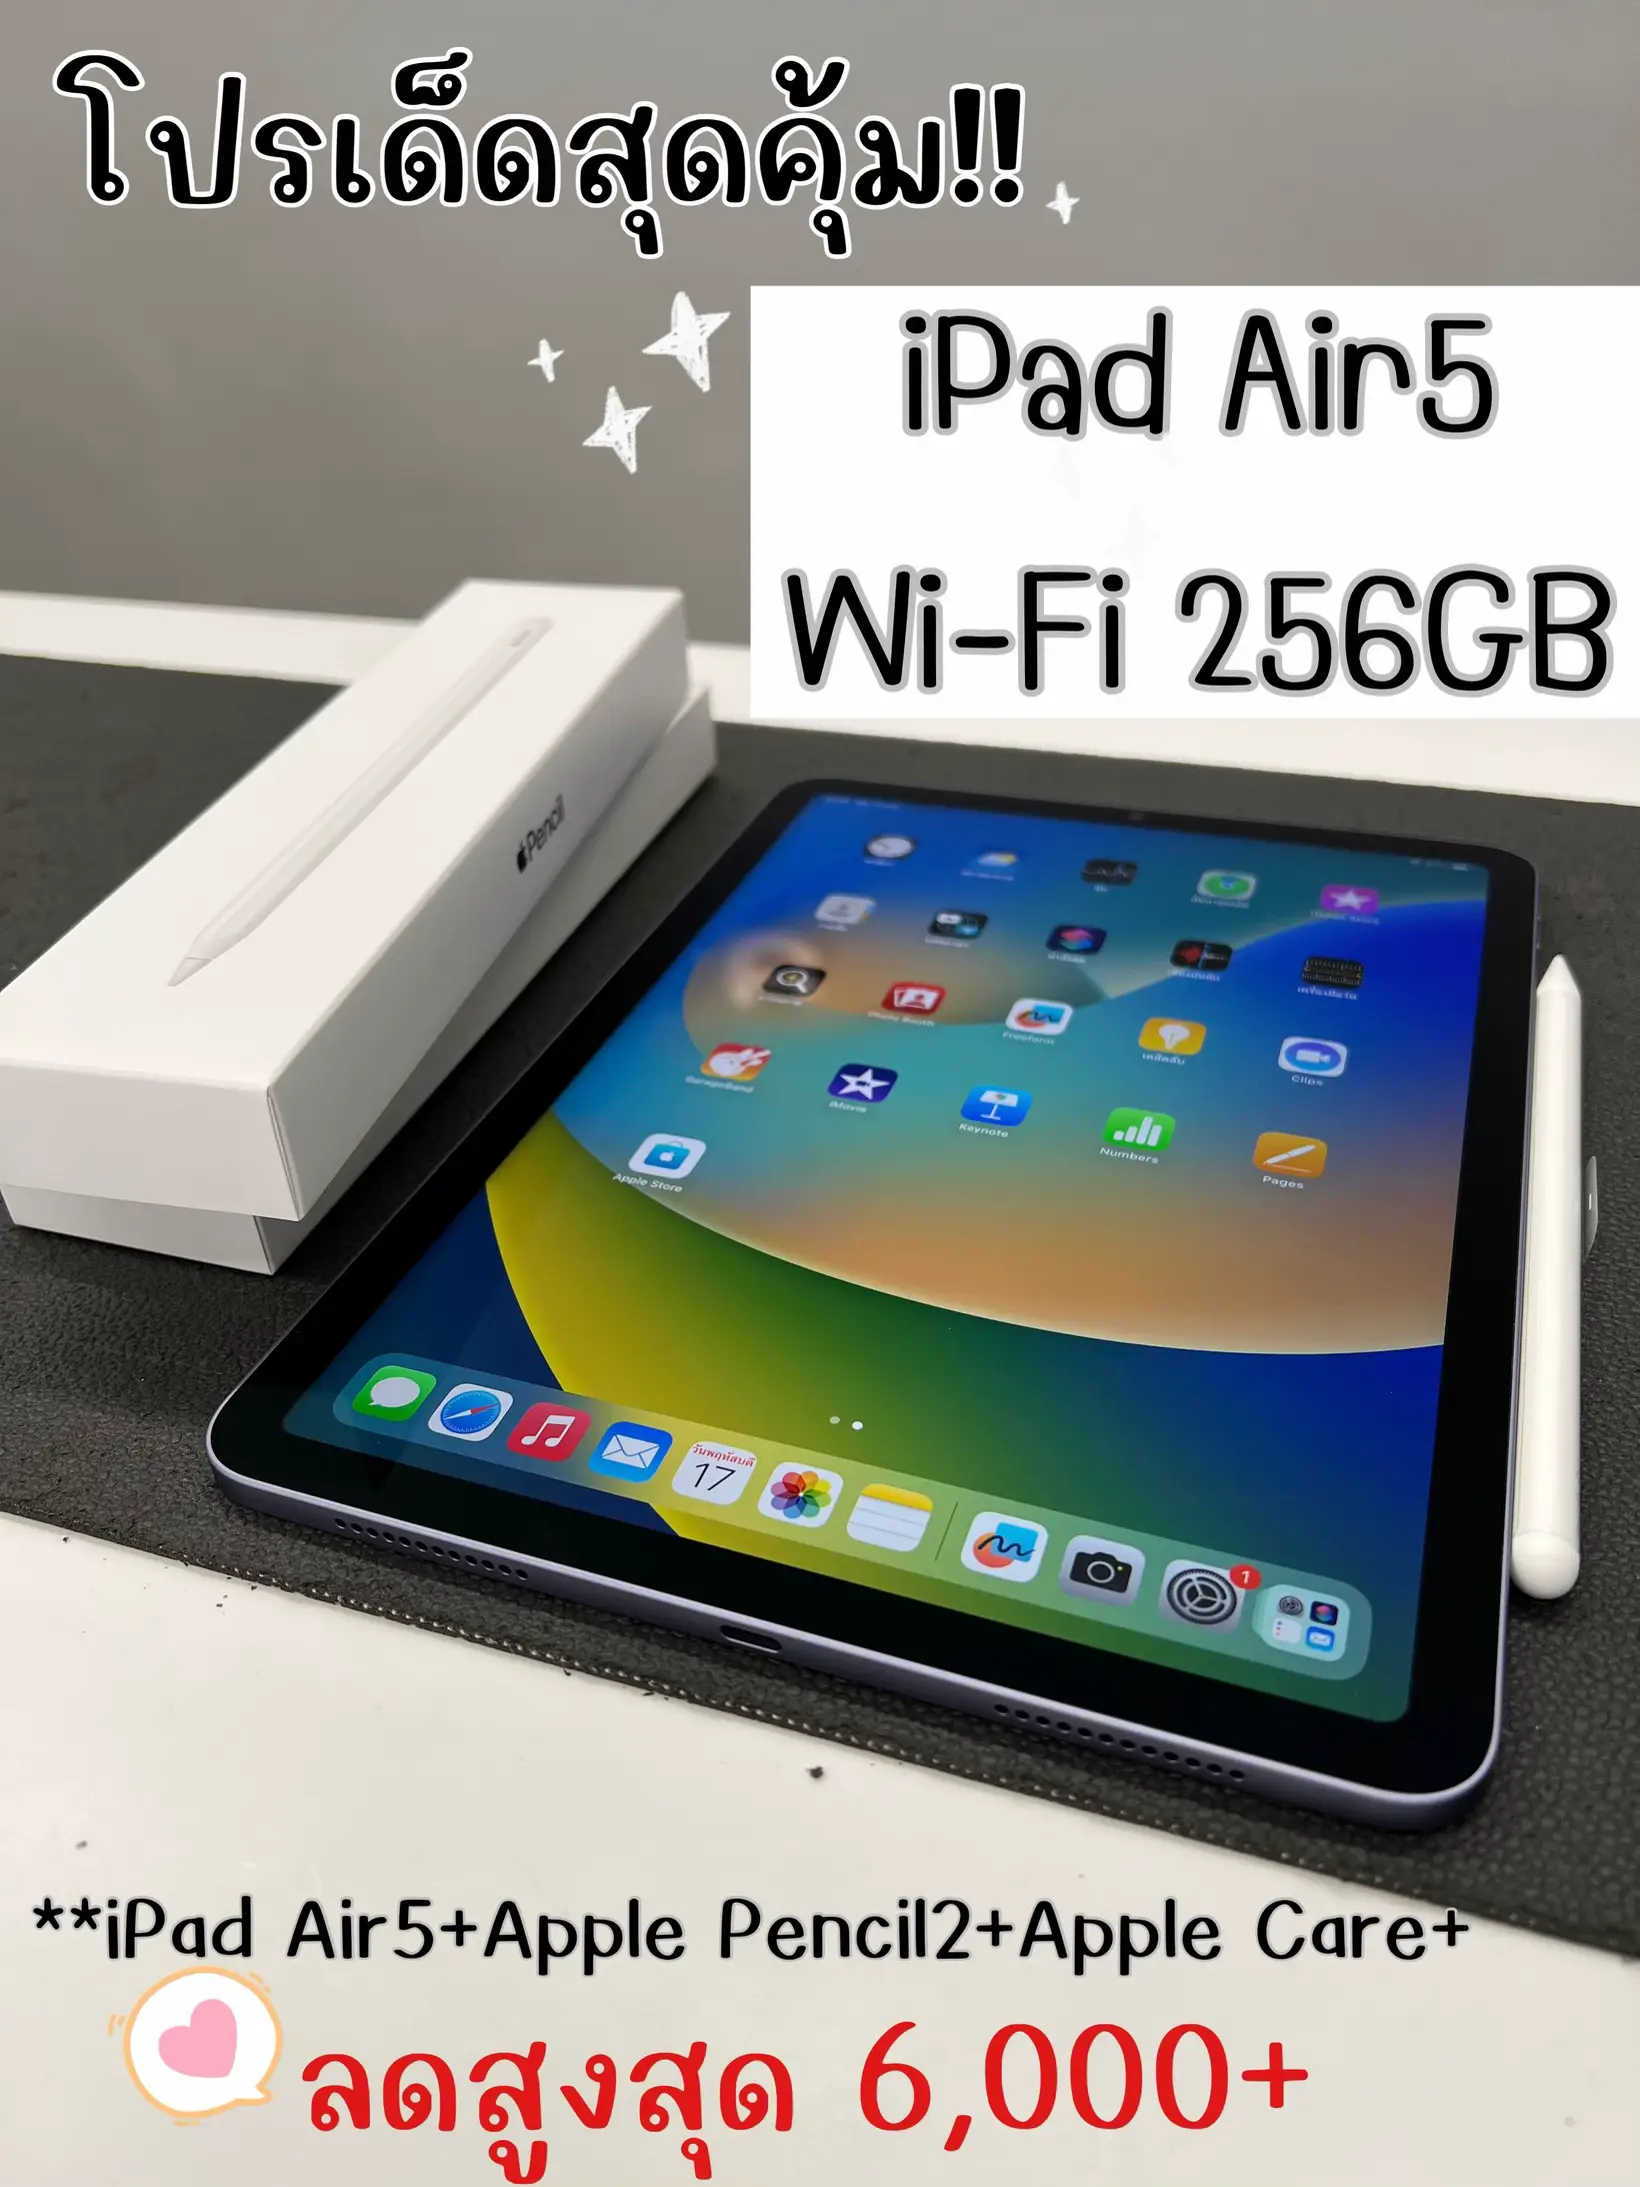 Best Value Pro iPad Air5 Wi-if 256GB Off Up To 6,000 + | Gallery